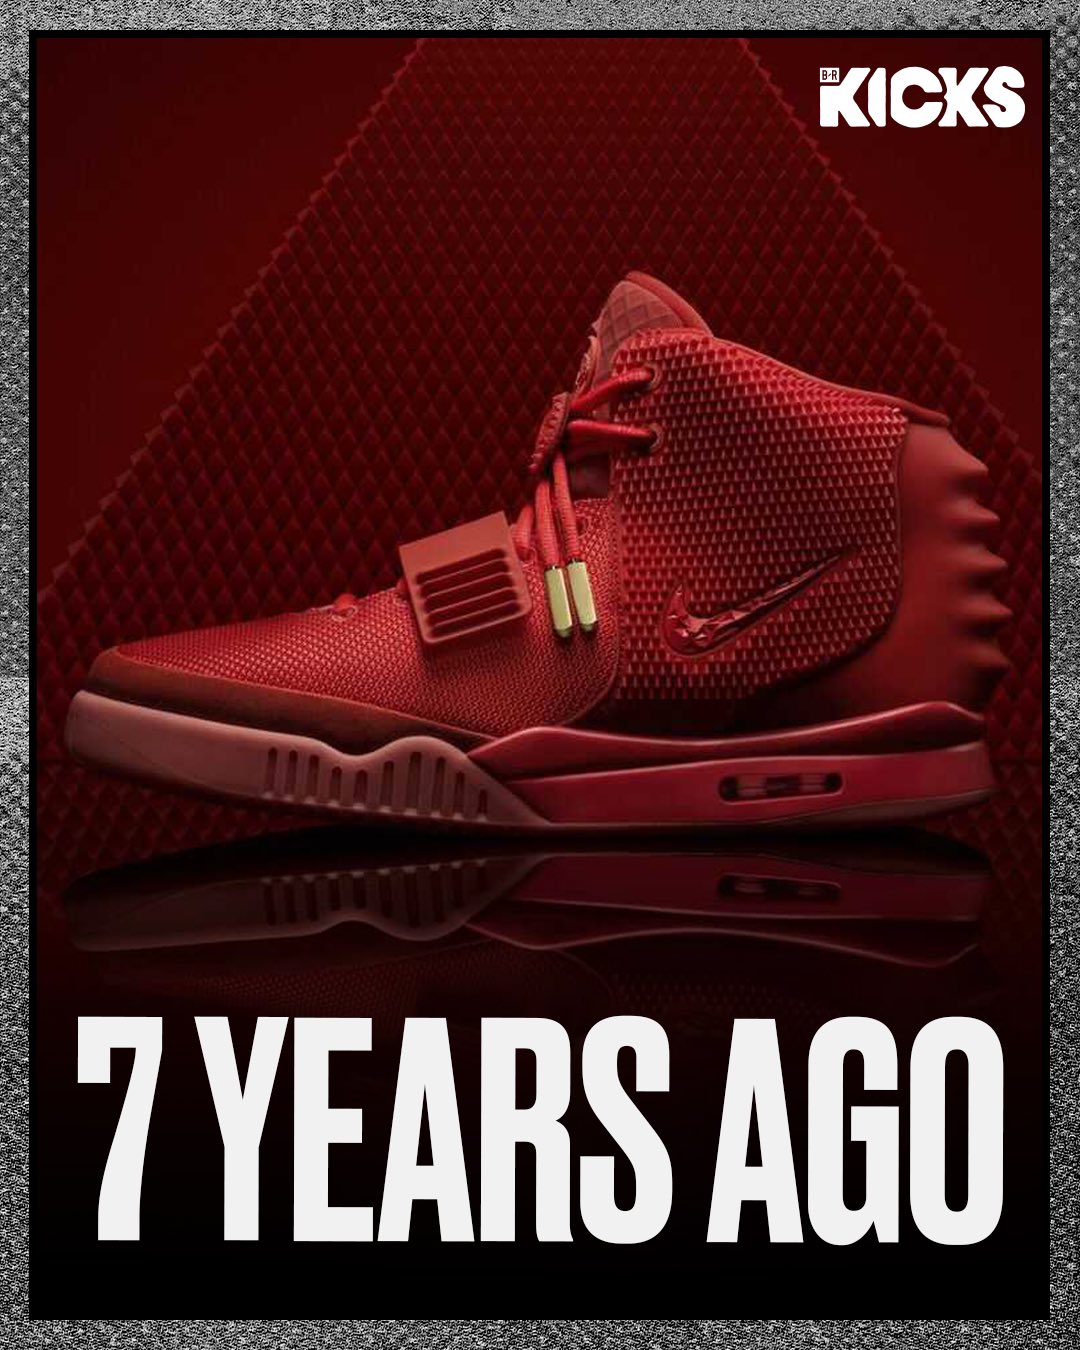 B/R Kicks on Twitter: "The Nike Yeezy 2 “Red October” released seven years ago today. Who copped and still has their pair? https://t.co/qXC3E0j1RN" / Twitter